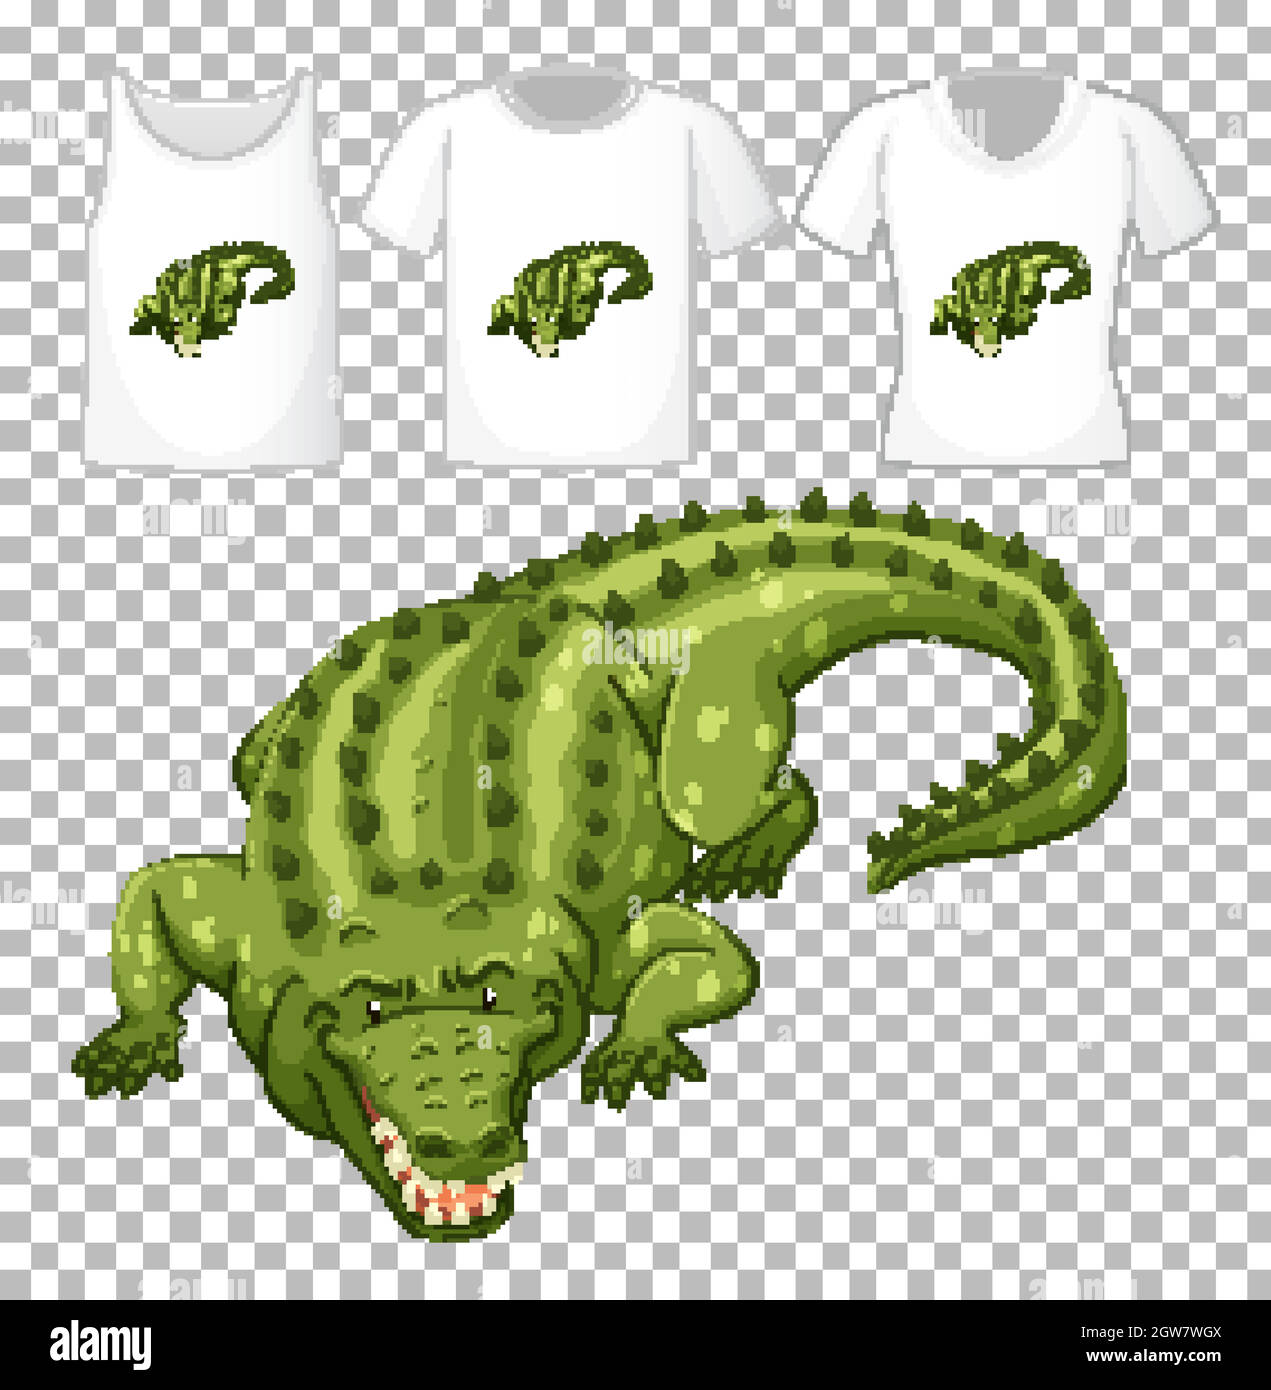 Set of different shirts with crocodile cartoon character isolated on transparent background Stock Vector